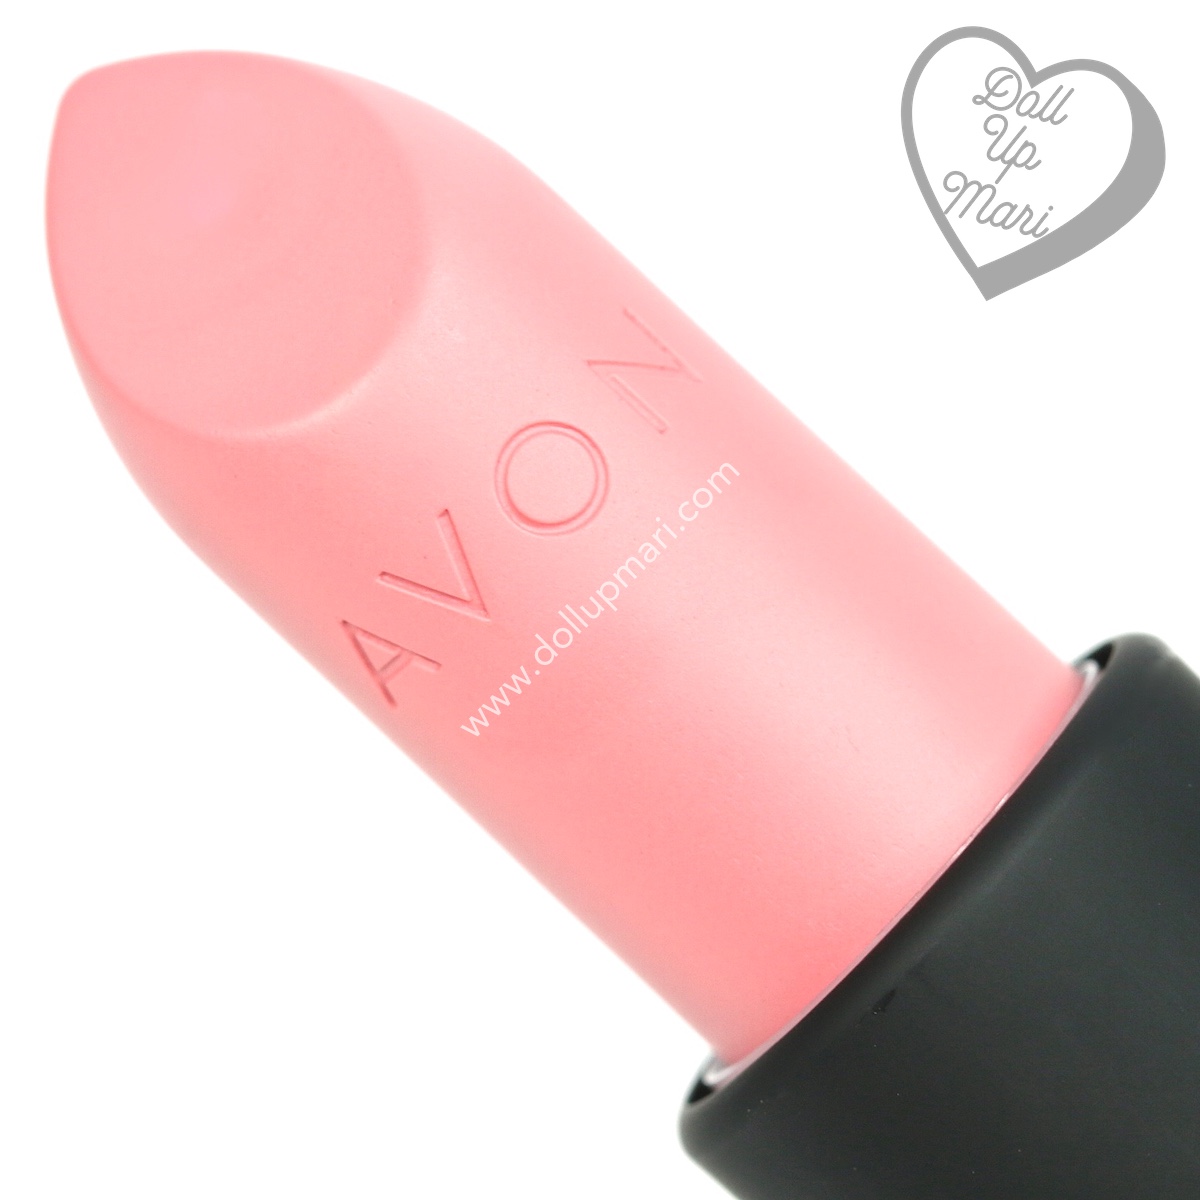 zoom in of Pink Passion shade of AVON Perfectly Matte Lipstick